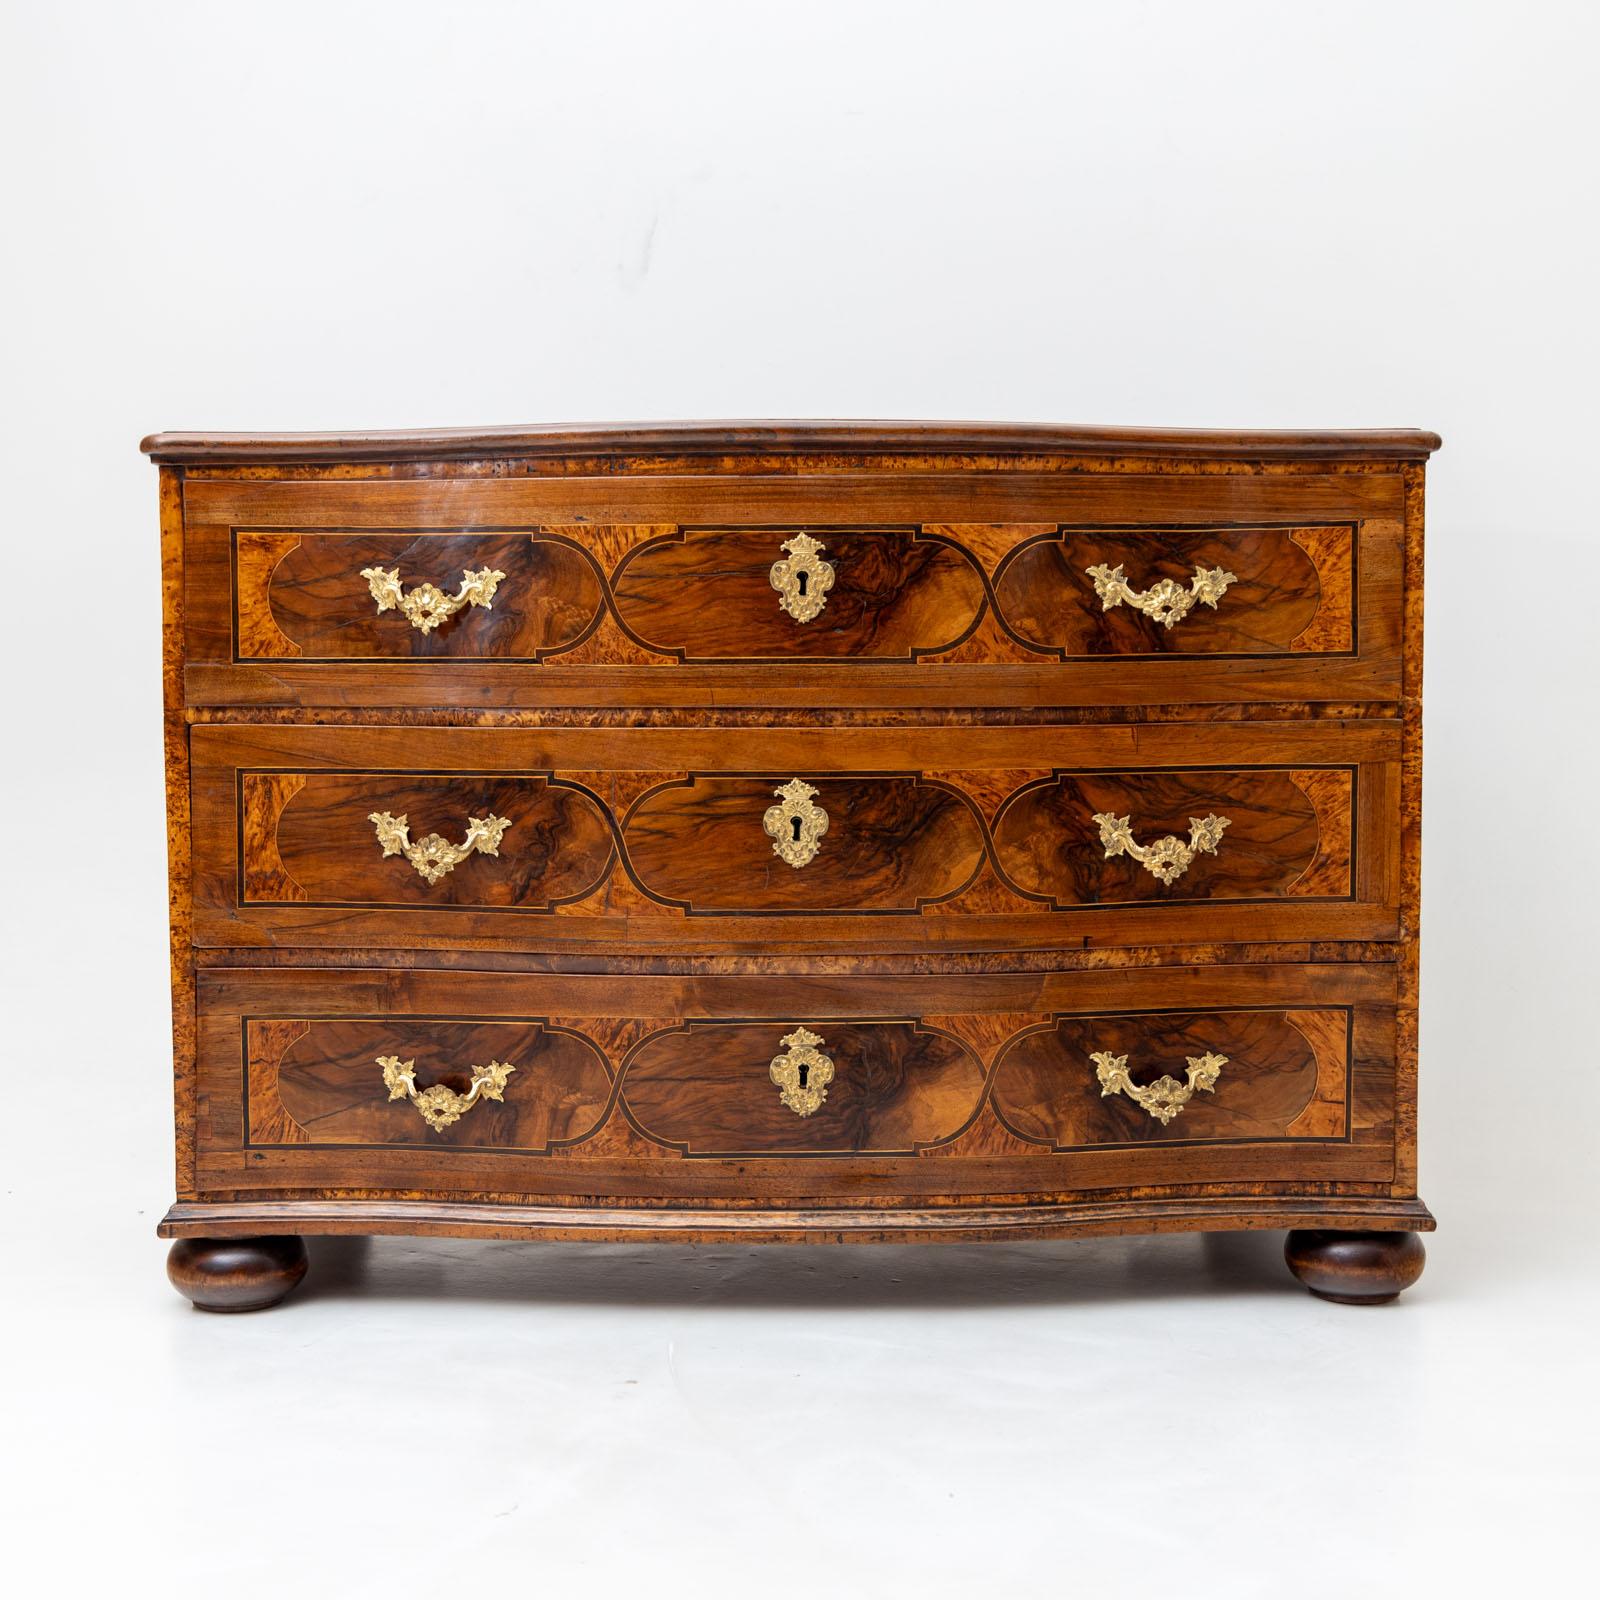 Polished Baroque Chest of Drawers in Walnut, Inlaywork and Bronze fittings, Mid-18th C. For Sale